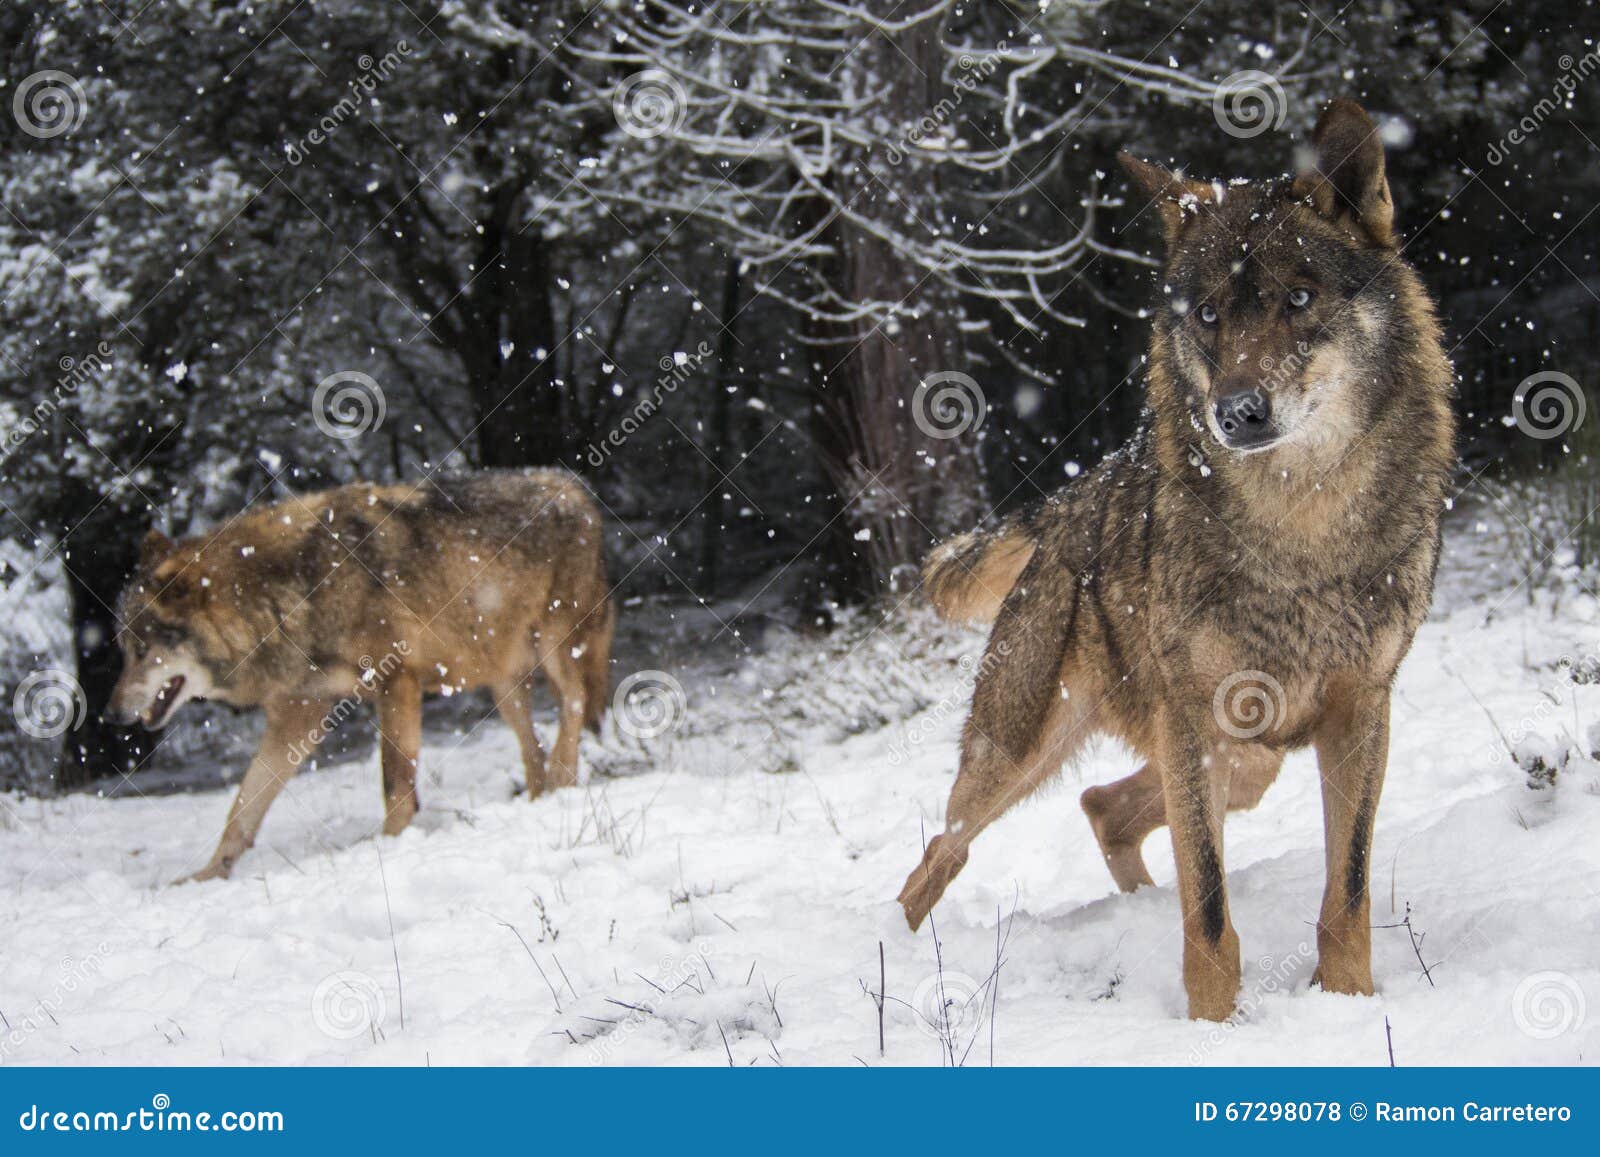 iberian wolves in the snow